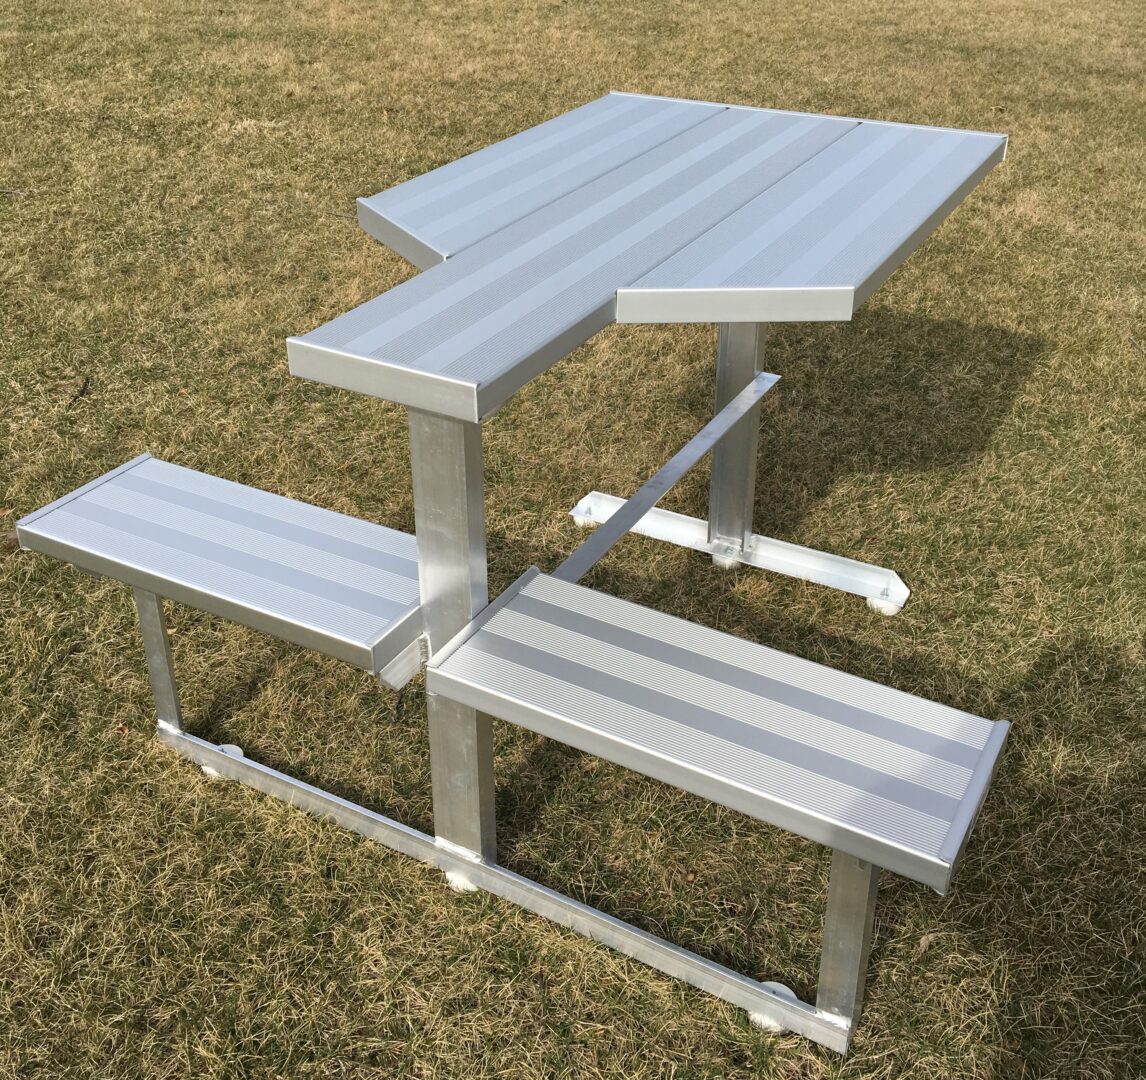 Aluminum outdoor activity bench or table.